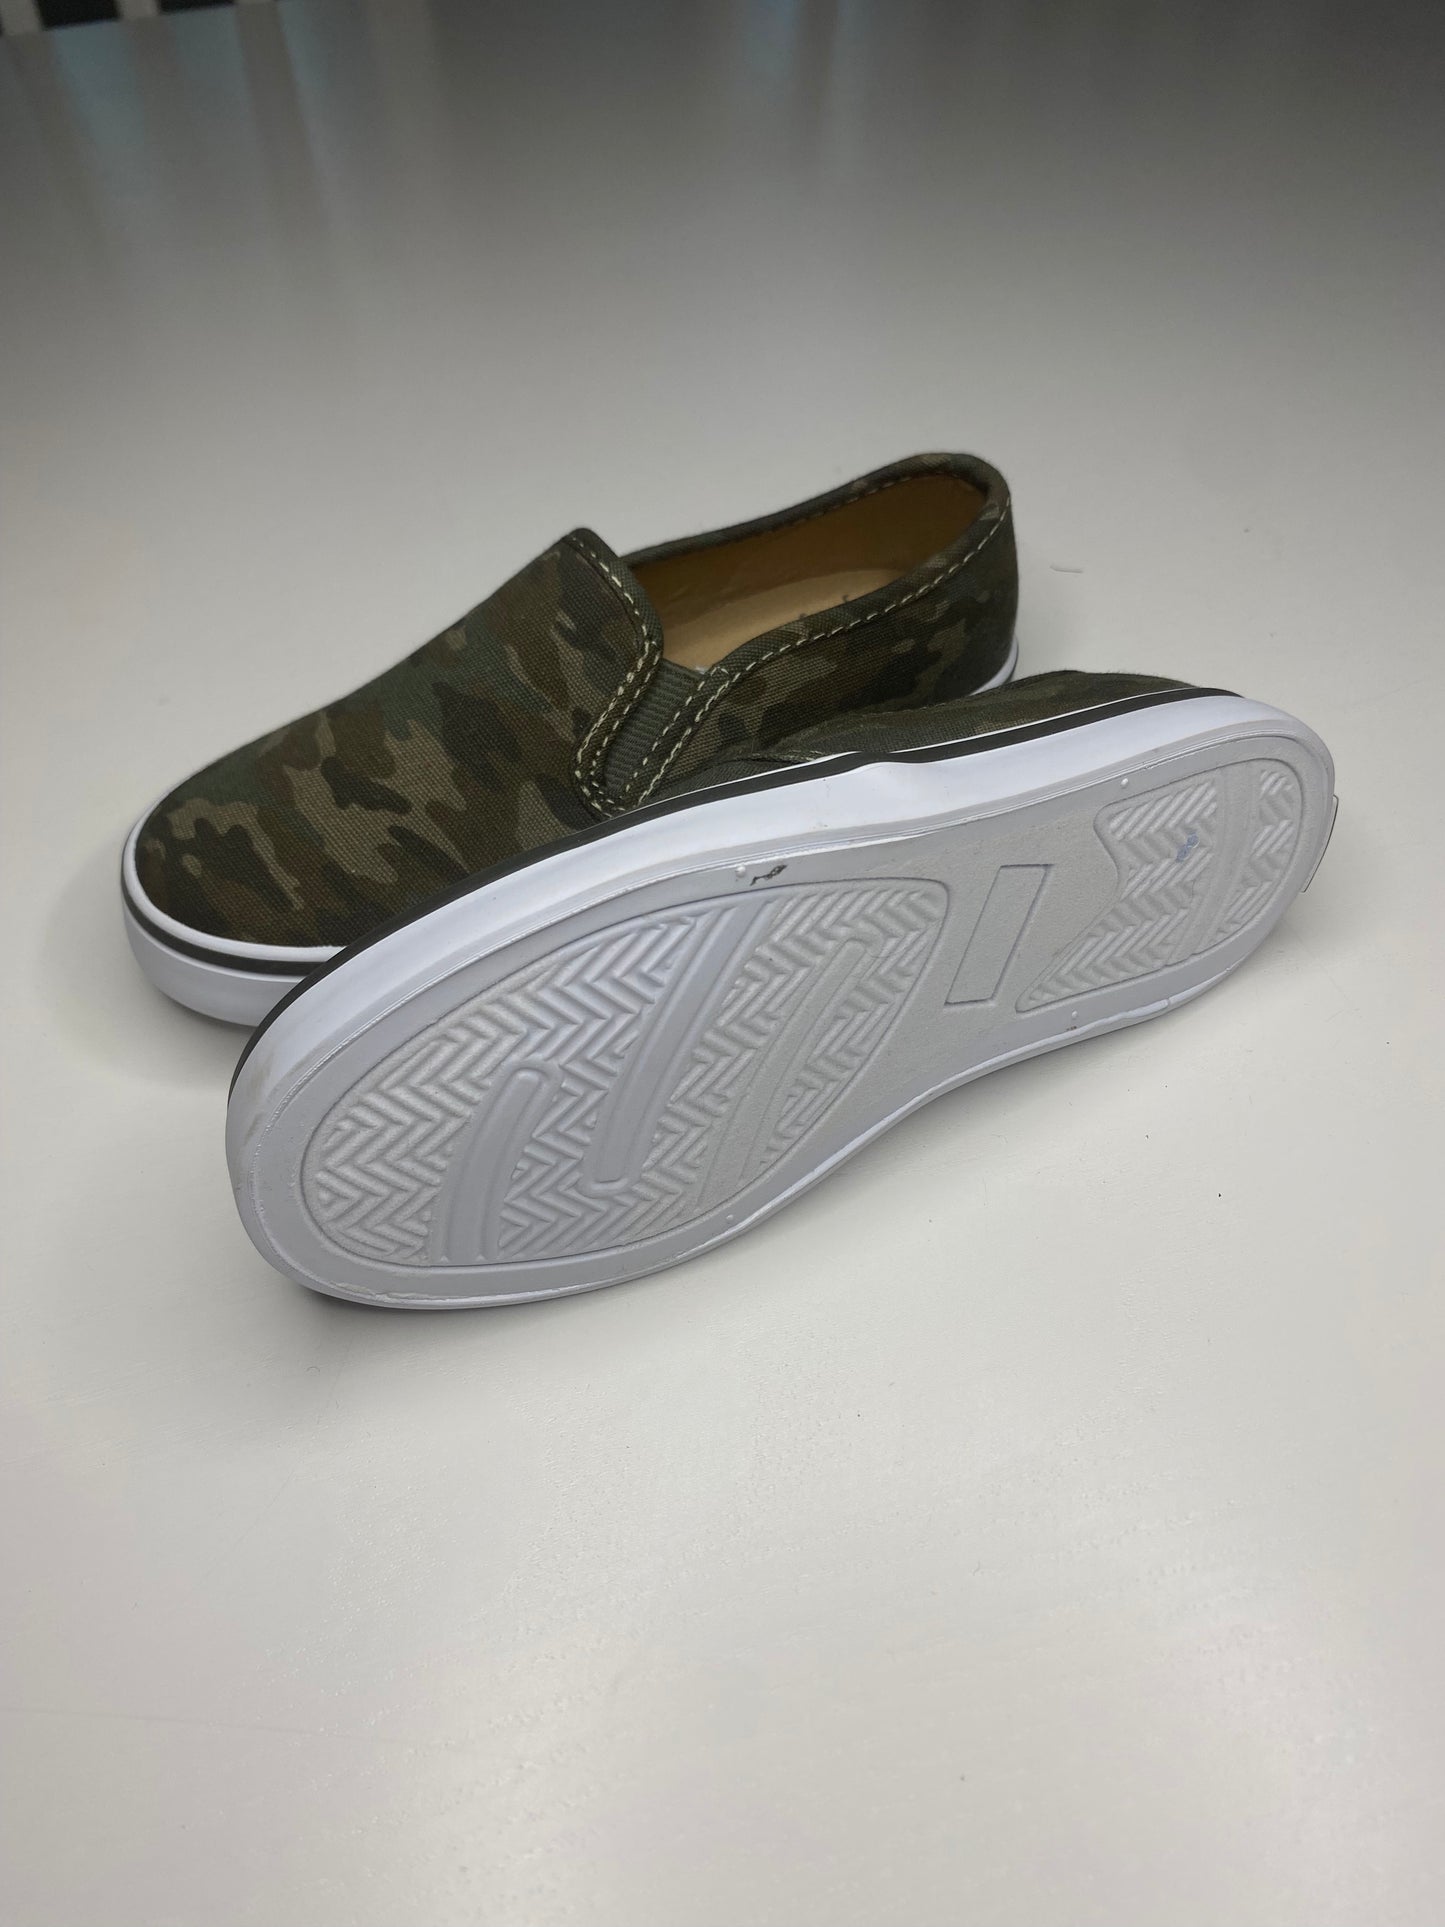 JANIE AND JACK Slip-on sneakers / Size 11